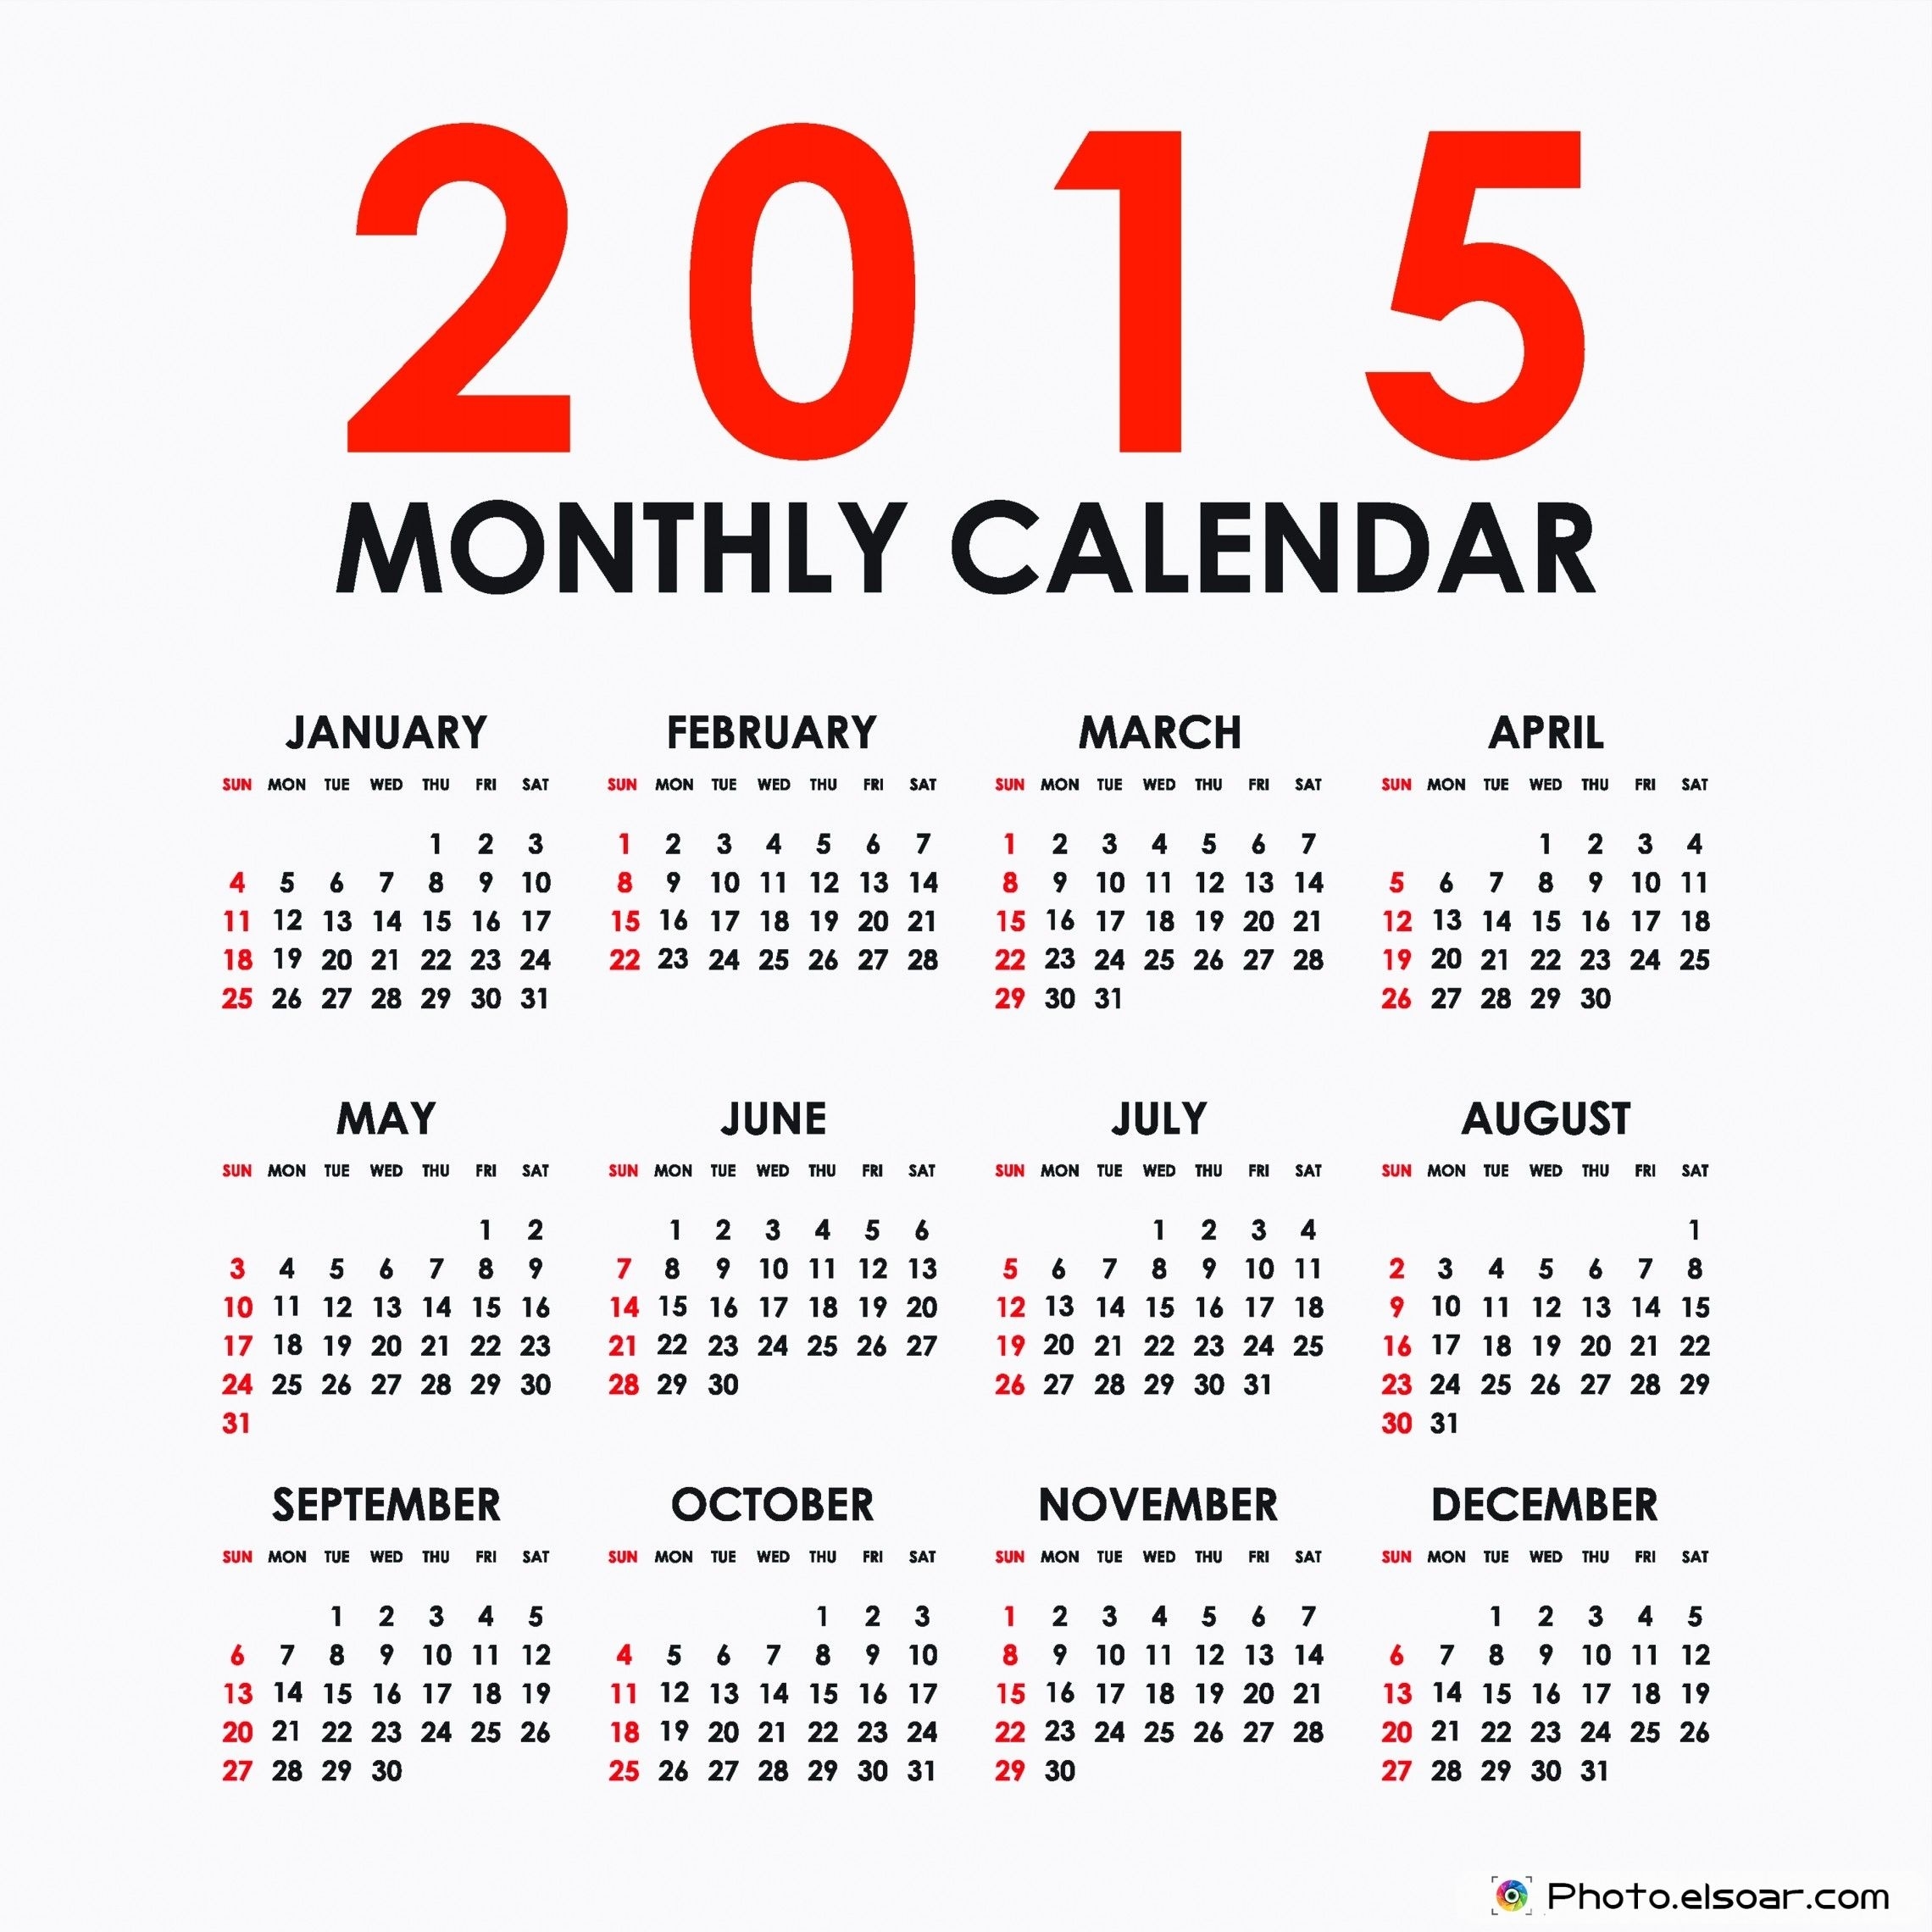 Ipad 2015 Calendar For Wallpaper Large | Simple Monthly 2015 Printing Calendar From Ipad